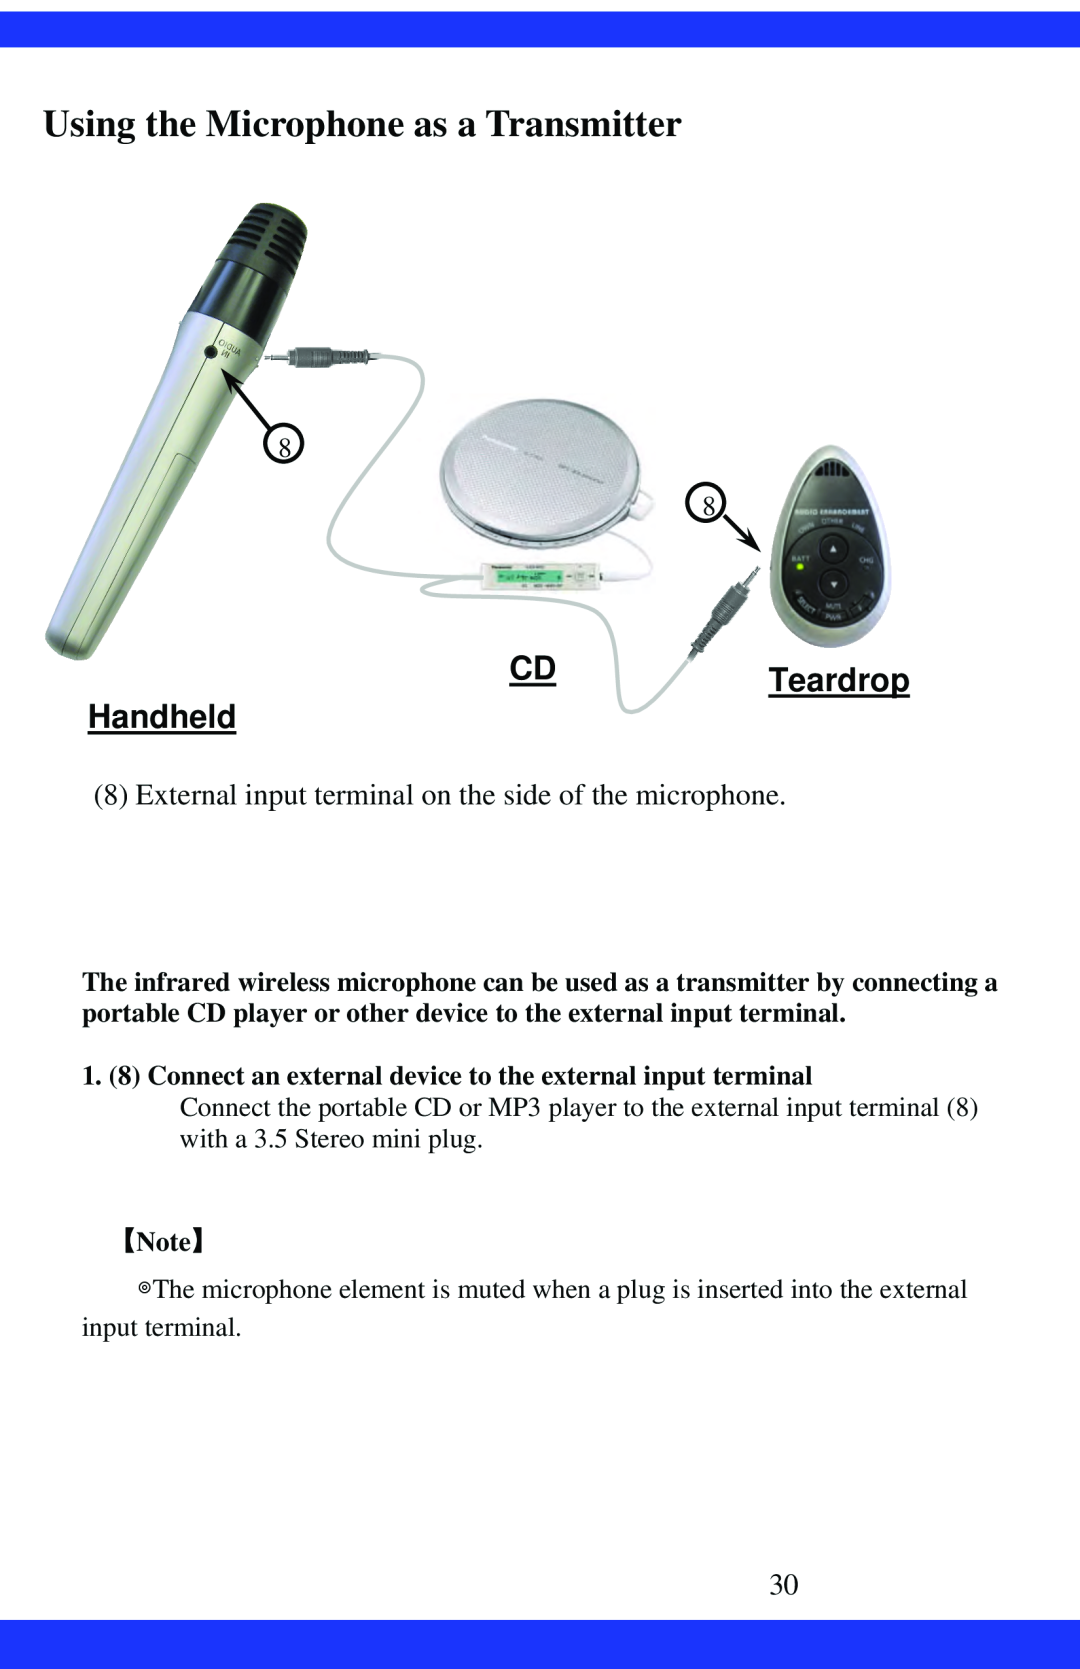 Dukane CAE-20W instruction manual Using the Microphone as a Transmitter, CDTeardrop Handheld 